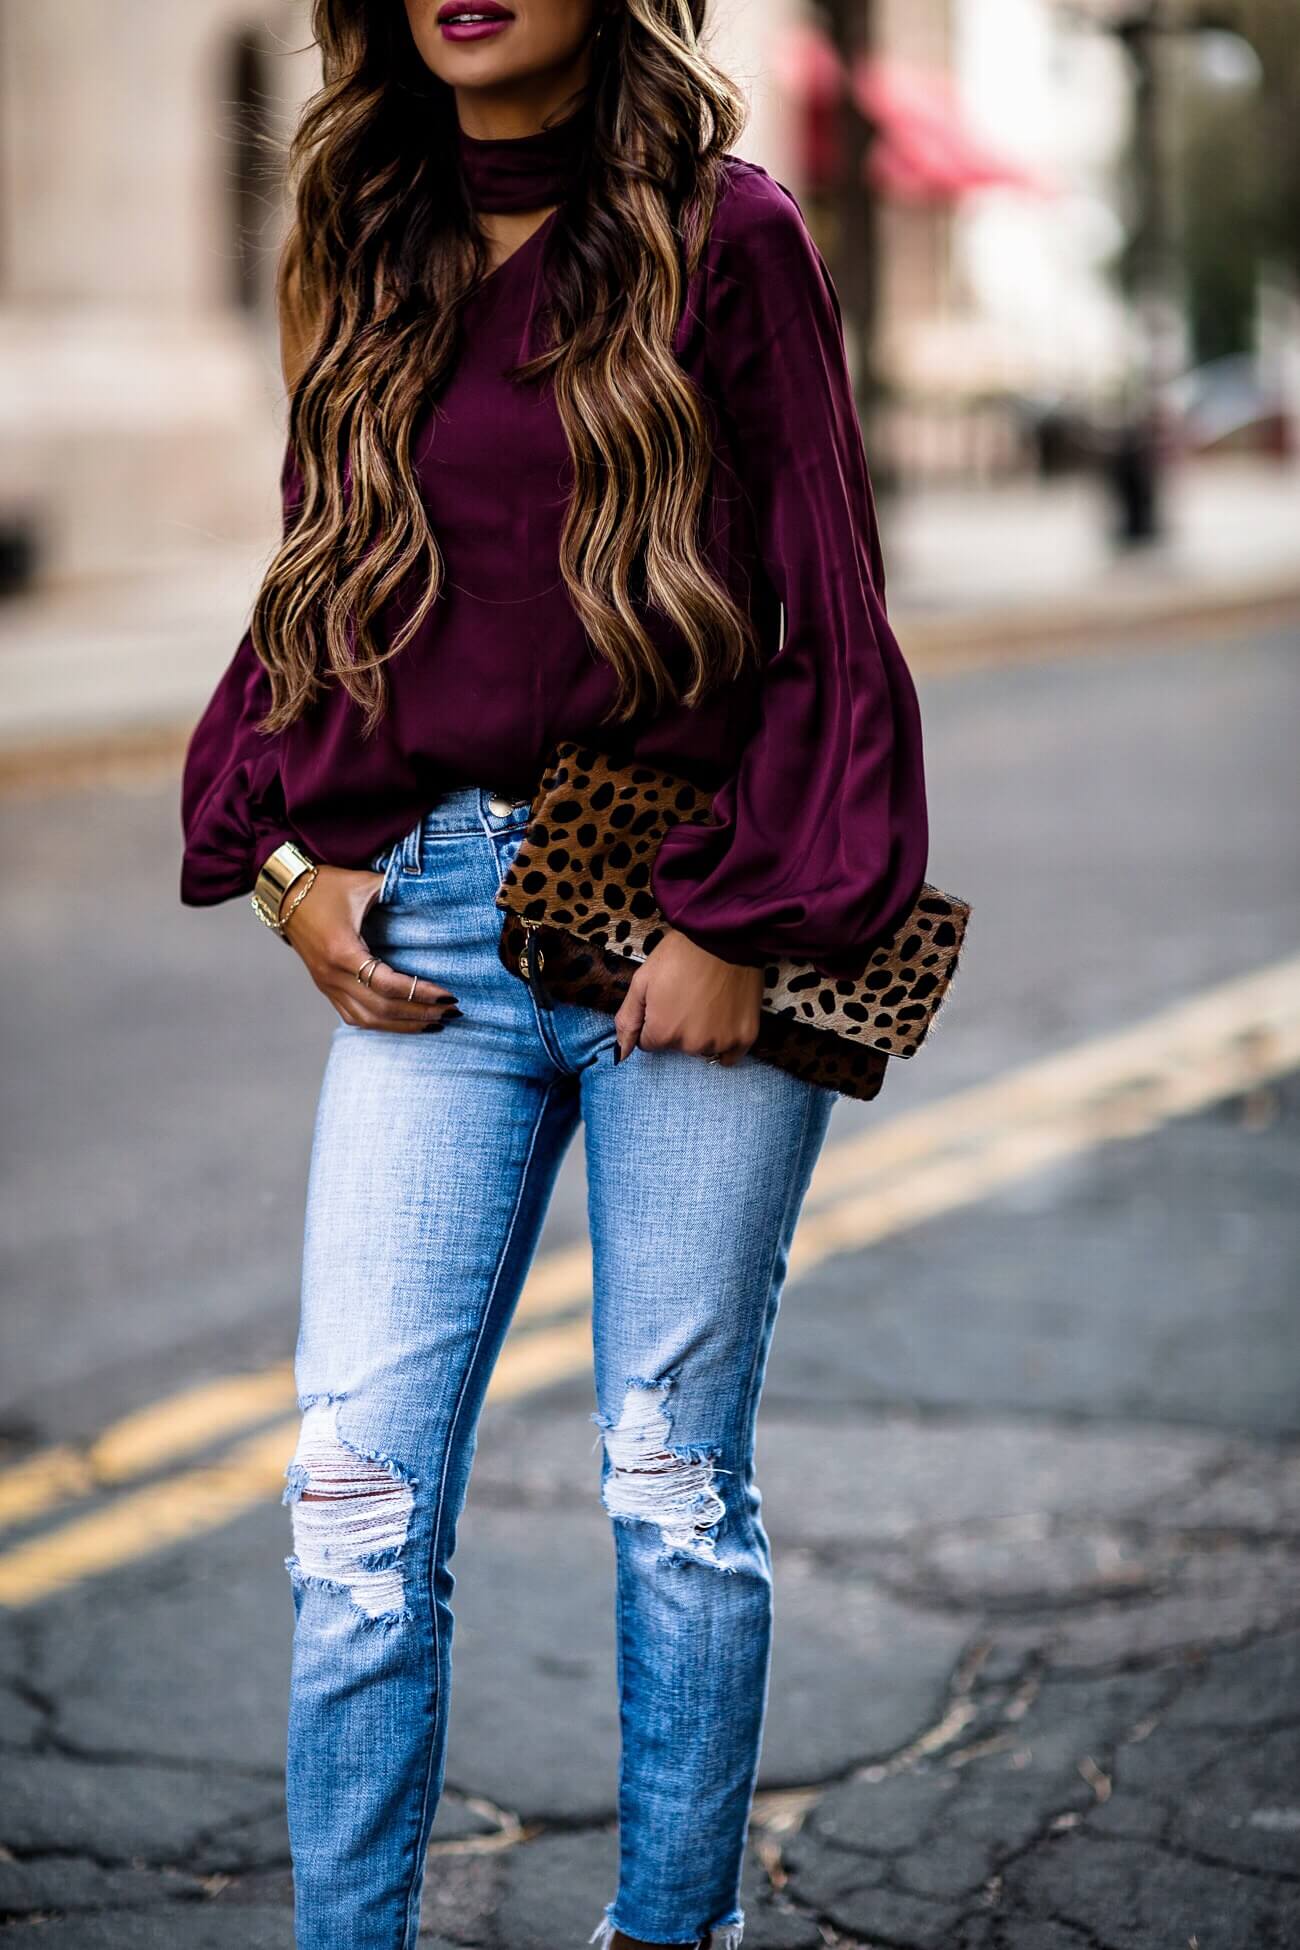 fashion blogger mia mia wearing a leopard clutch from intermix and a purple top